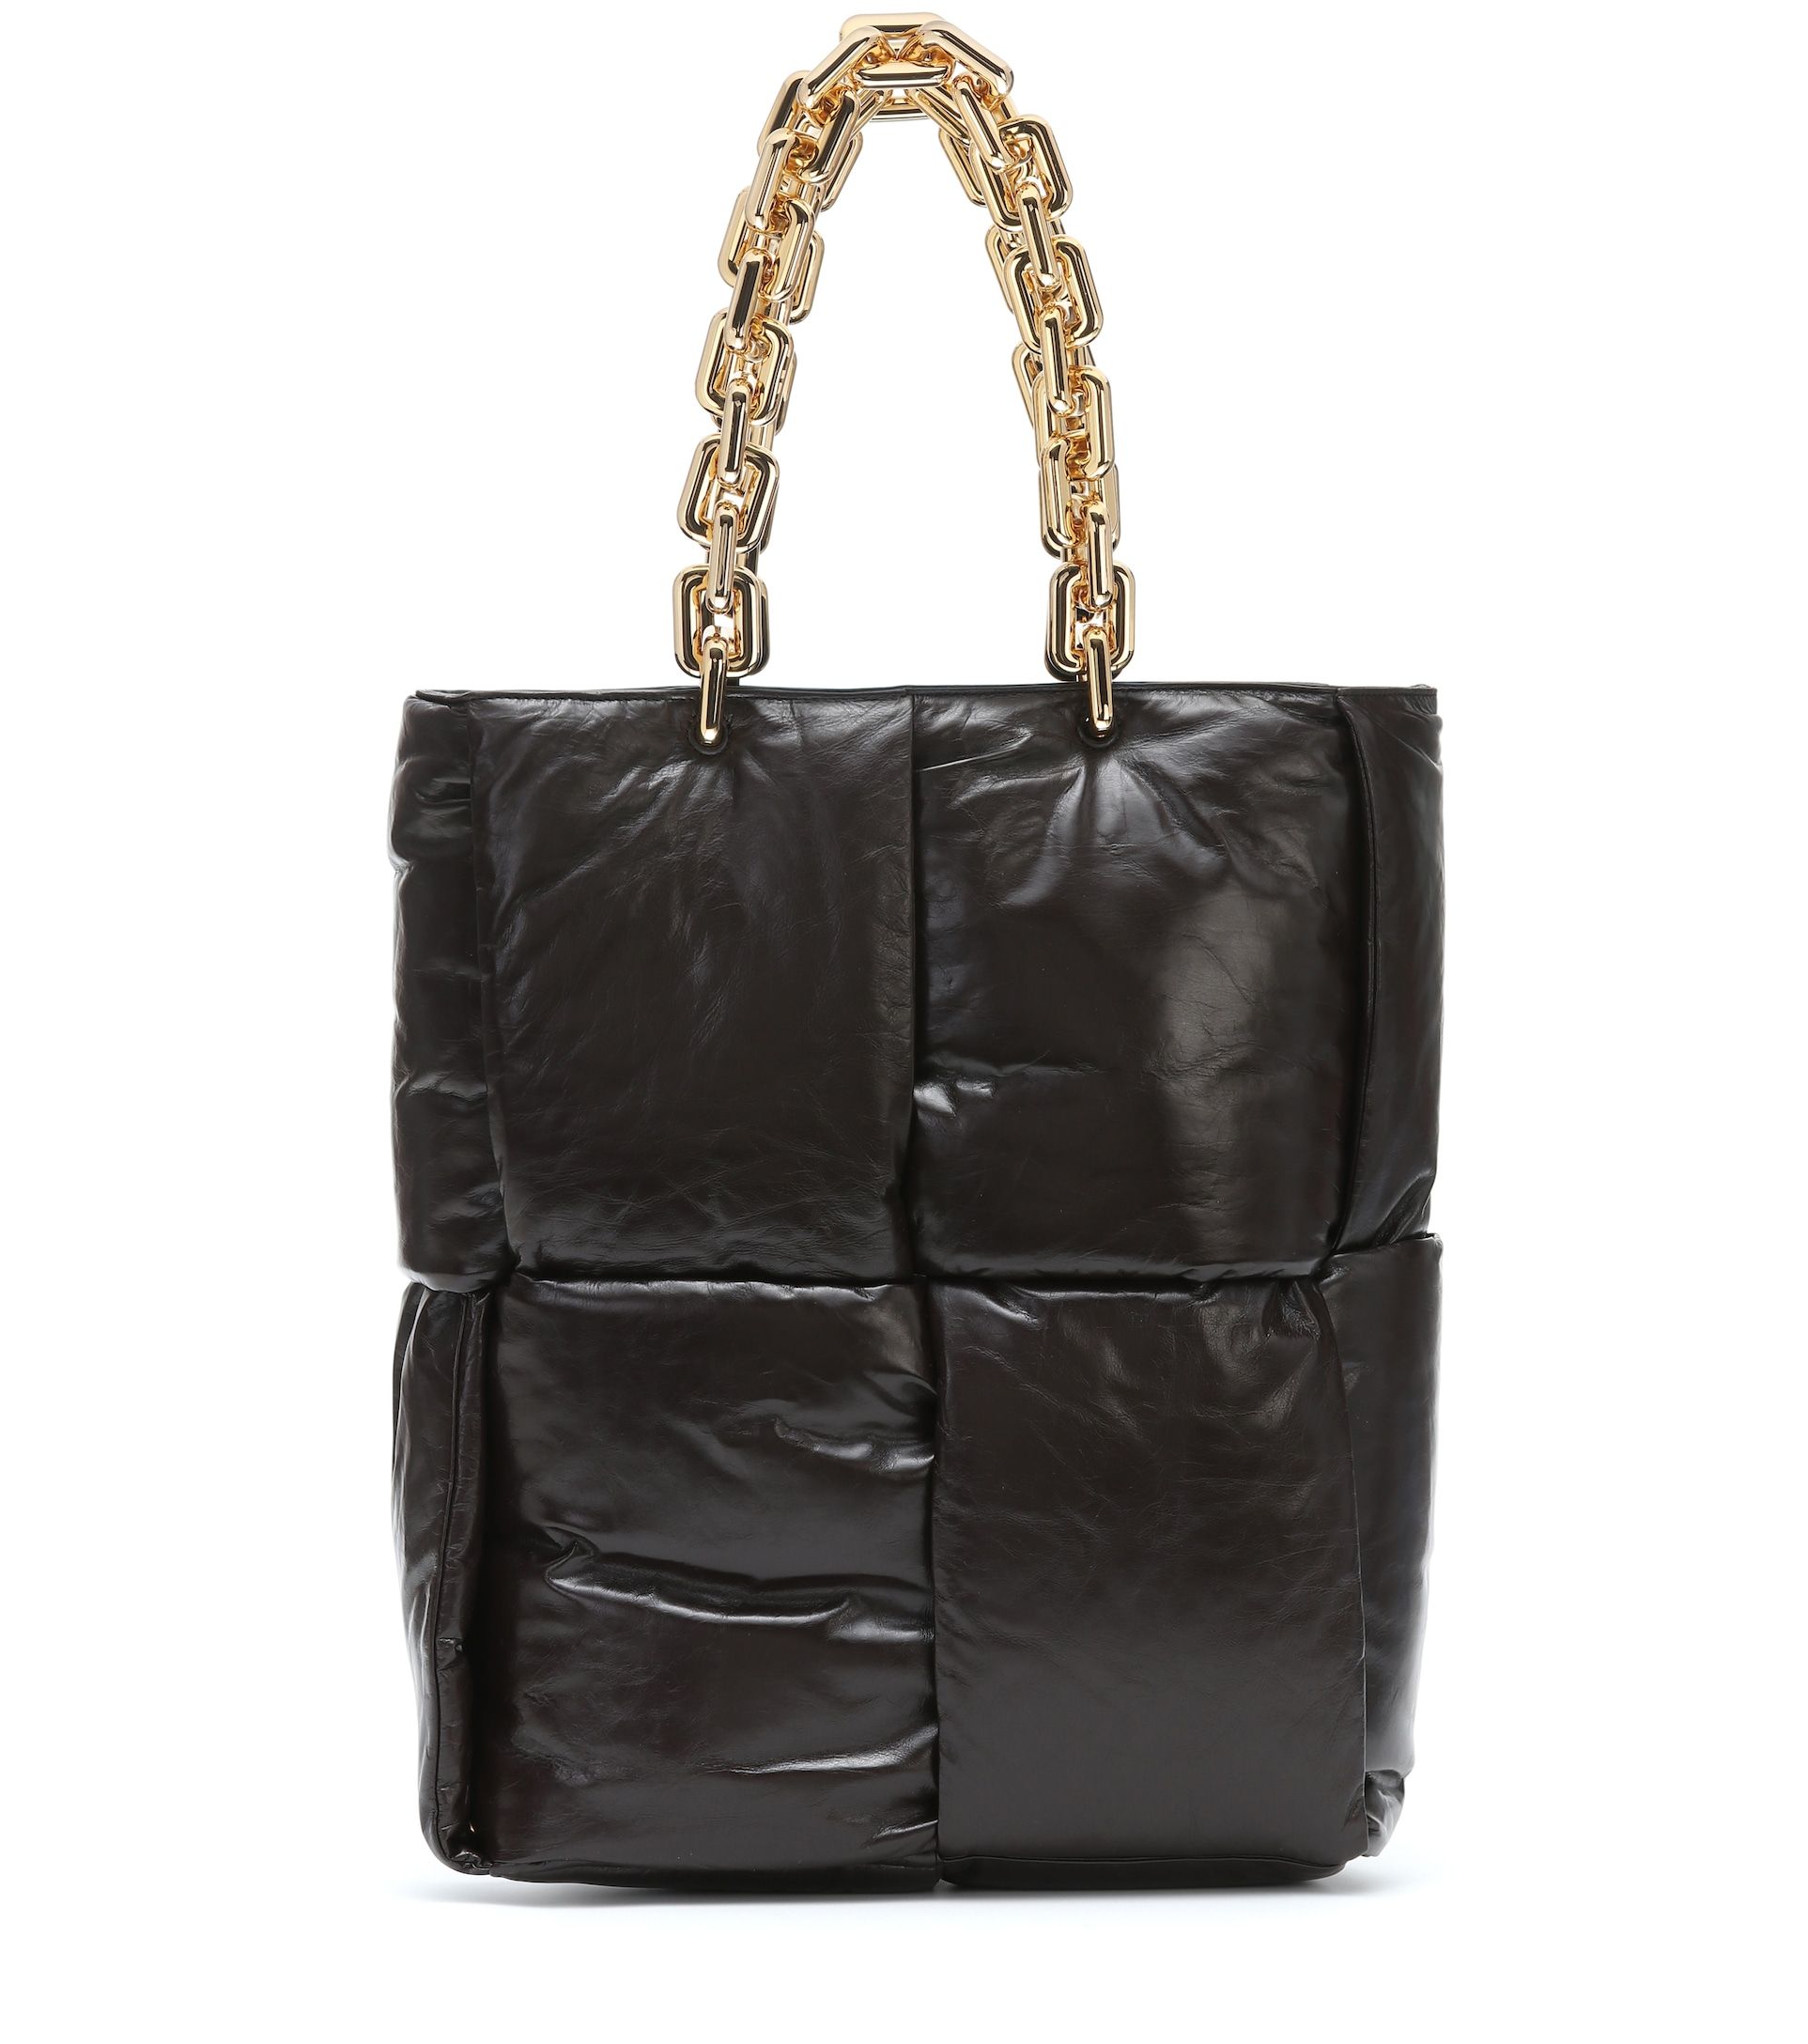 The Chain Leather Tote 